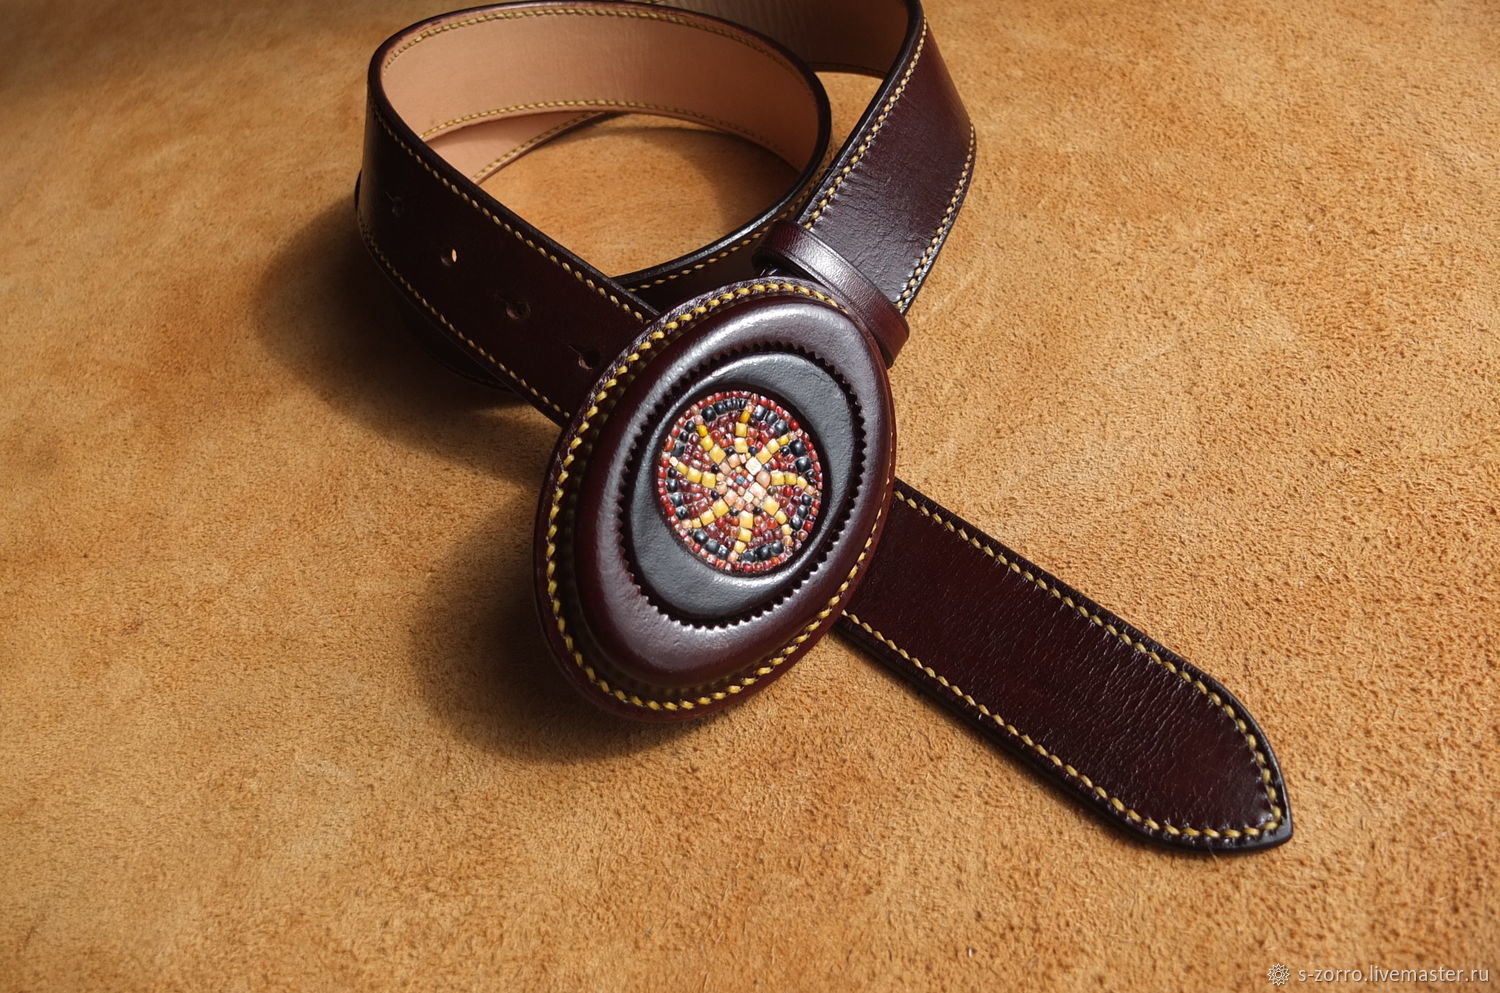  Strap with original buckle, Straps, Moscow,  Фото №1